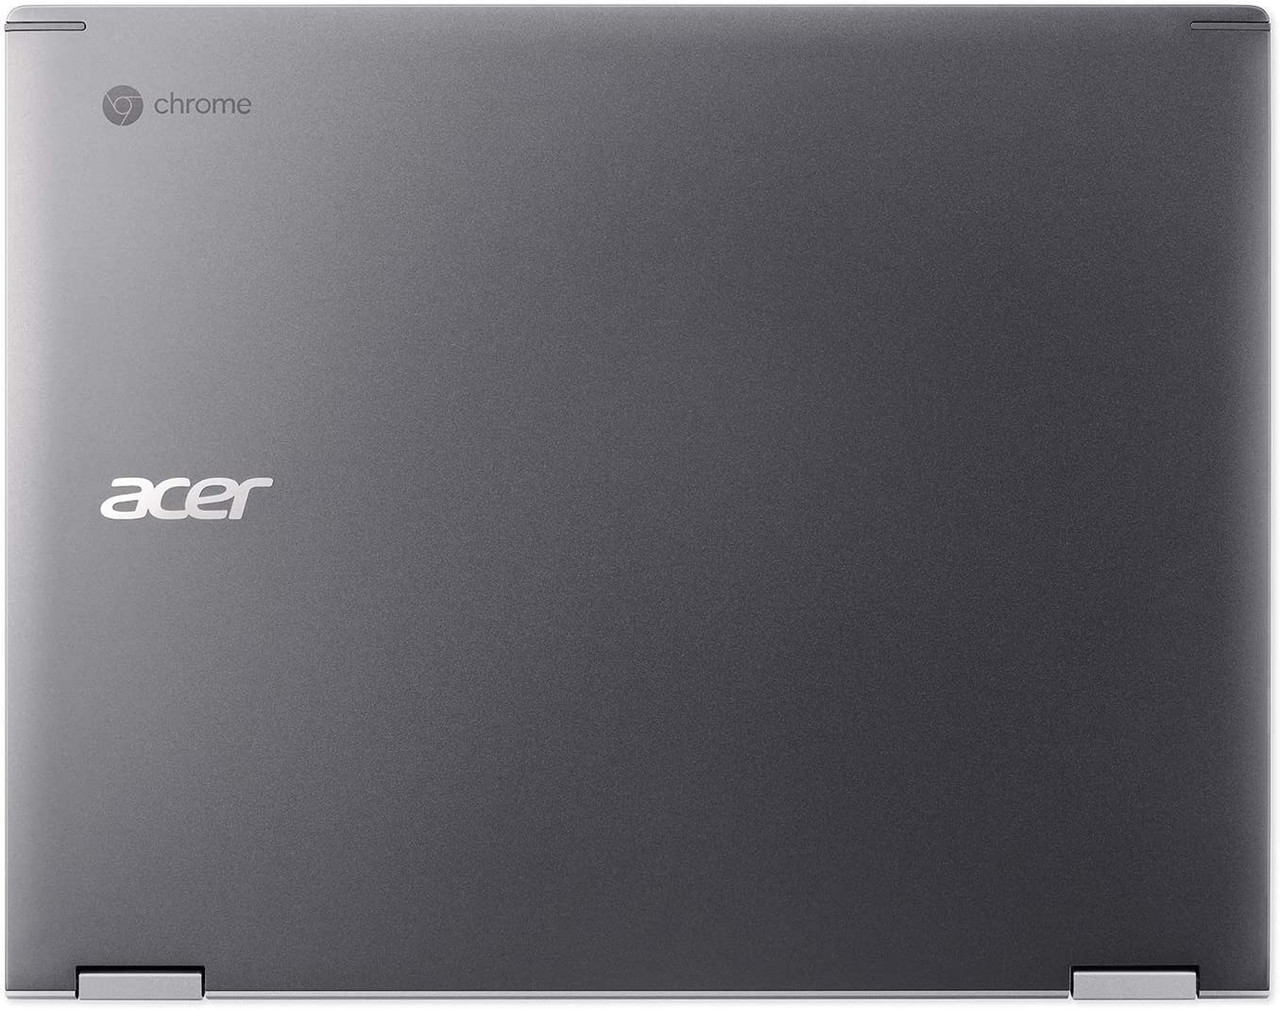 Acer - Chromebook Spin 713 2-in-1 13.5 2K VertiView 3:2 Touch - Intel  i5-10210U - 8GB Memory - 128GB SSD – Steel Gray